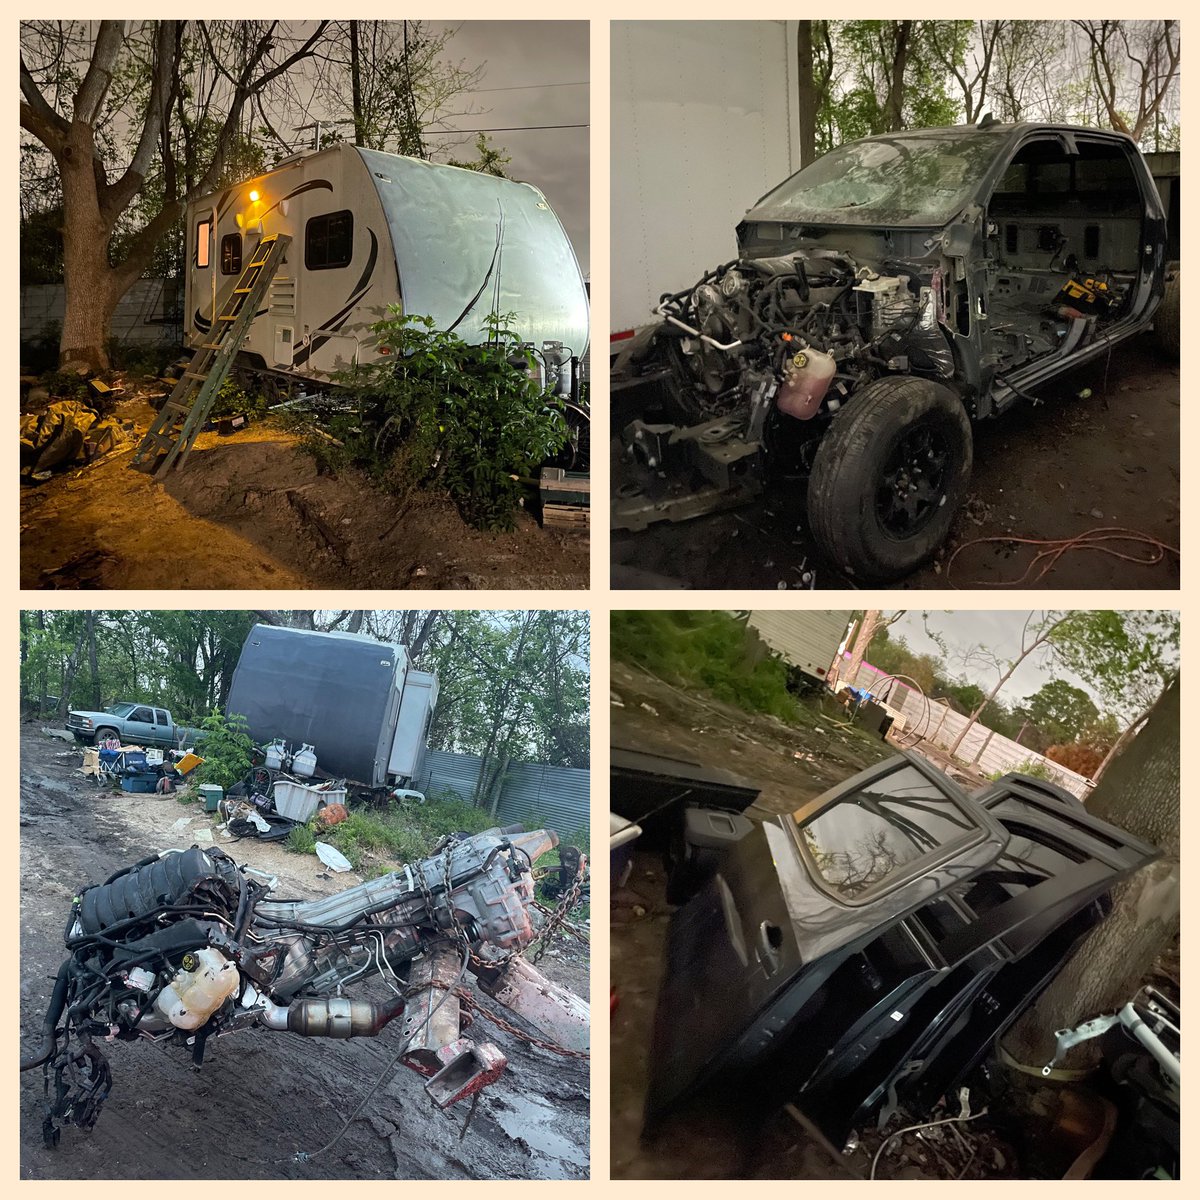 Overnight, while responding to a separate call in the Aldine area, @HCSOTexas deputies sighted some suspicious activity and determined the site was being used as a chop shop. @HCSO_SID responded to assist with the investigation: 2 stolen RV’s, 2 stolen trucks, a